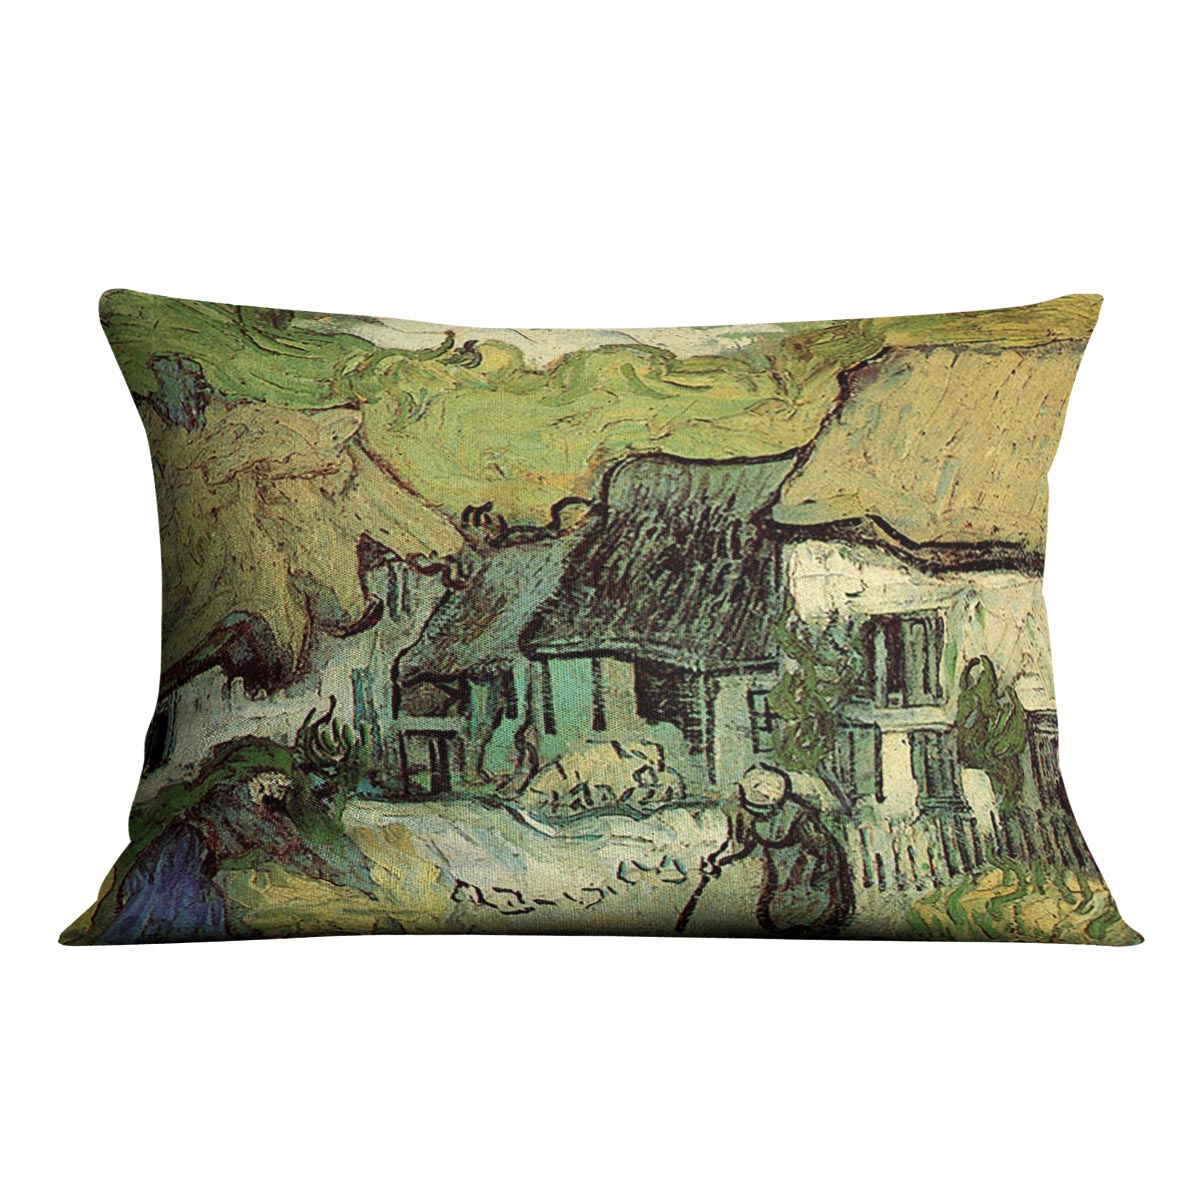 Thatched Cottages in Jorgus by Van Gogh Cushion